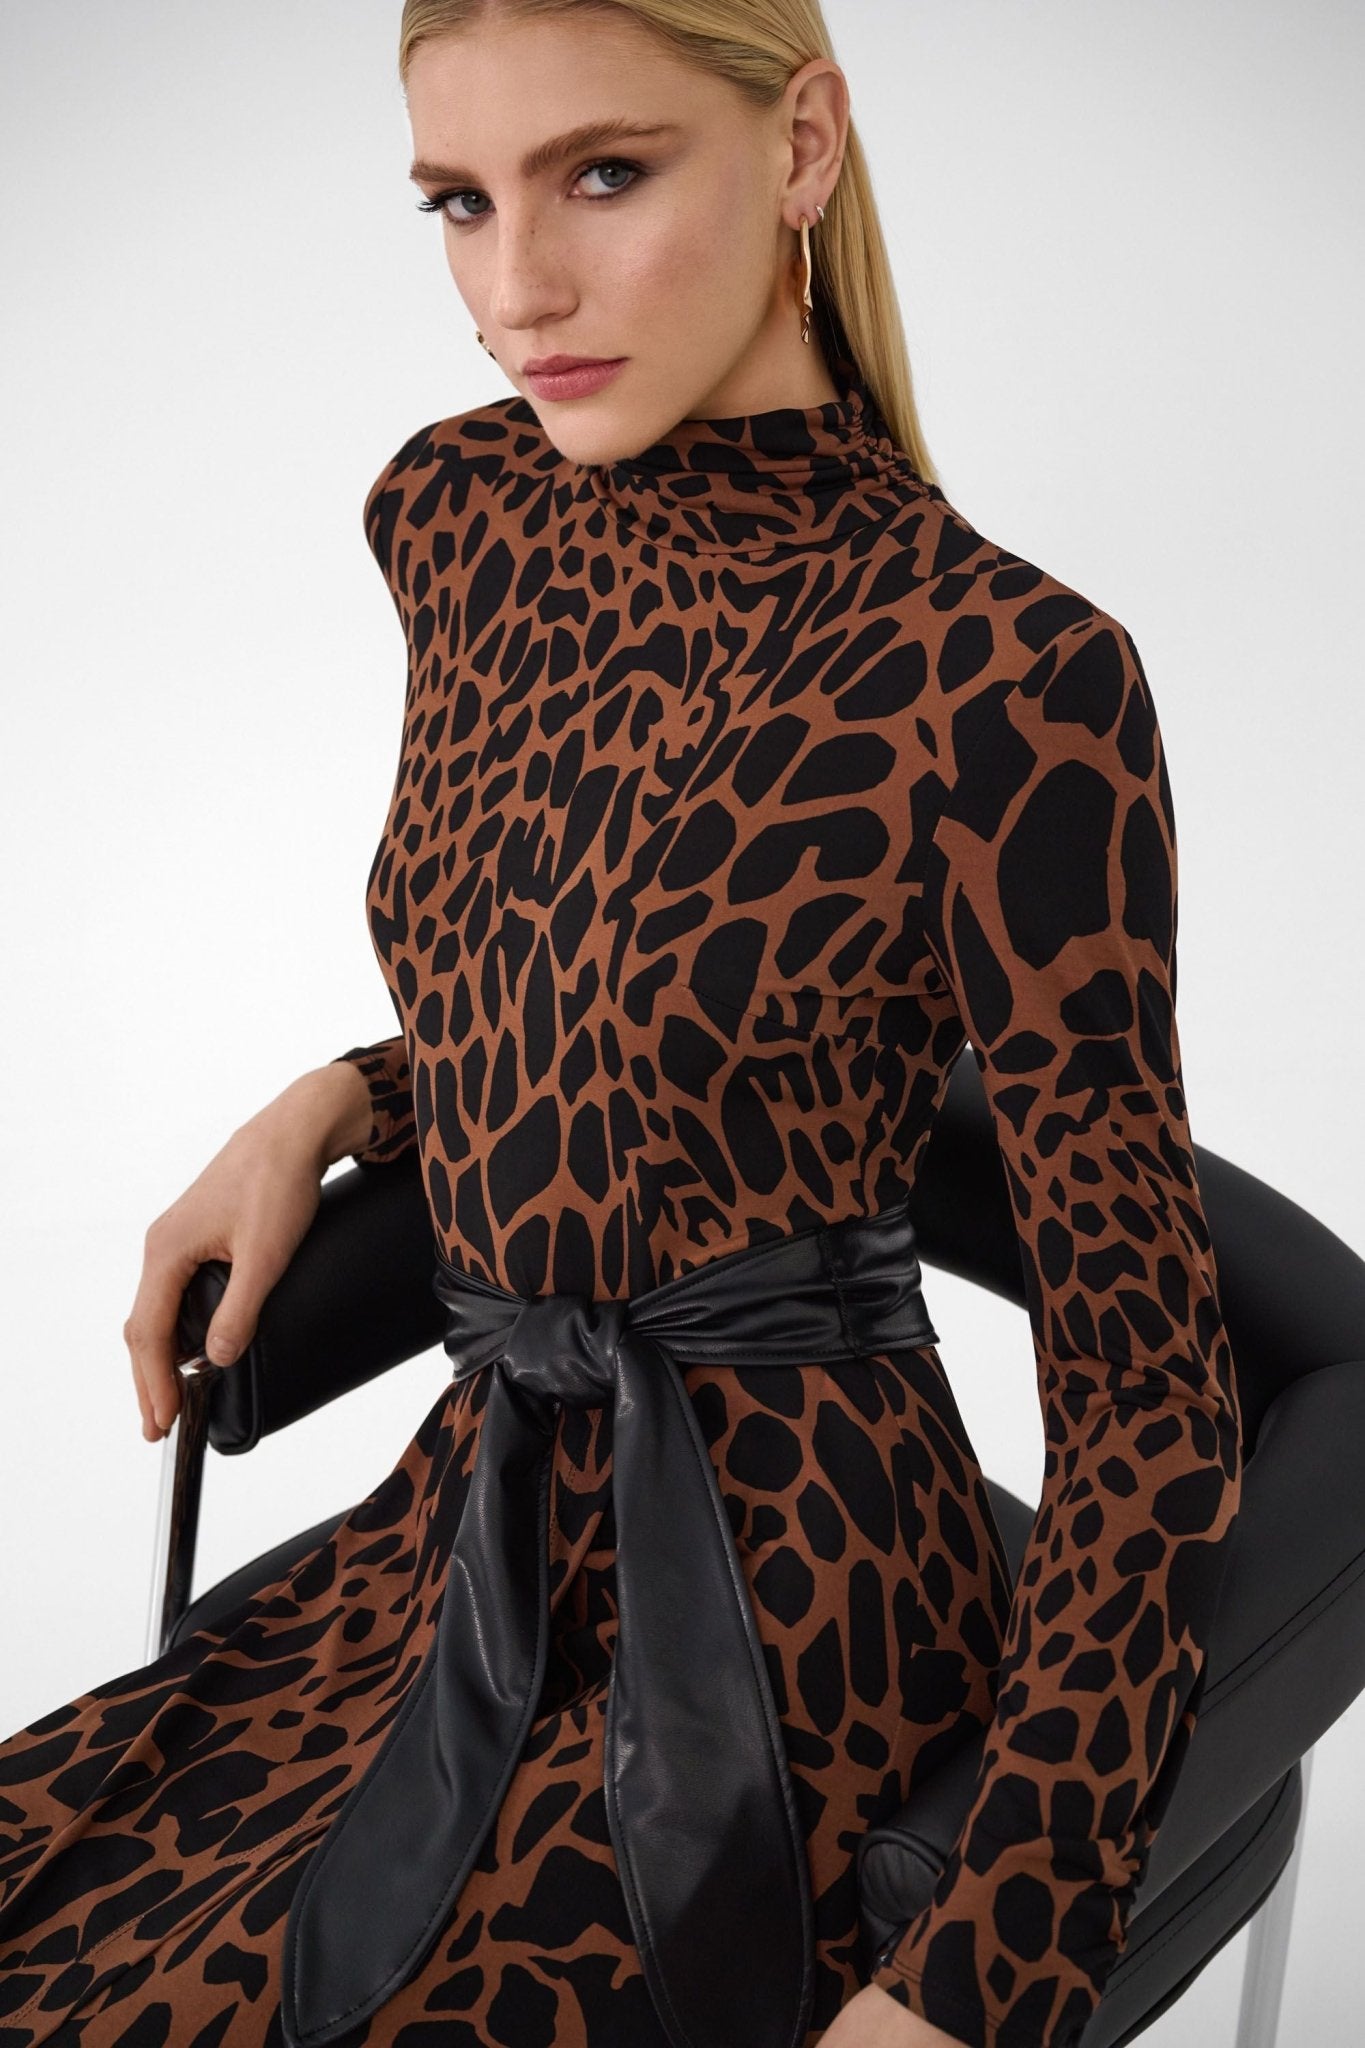 Shop Animal Print Silky Knit Dress with Faux Leather Belt Style 234258 │ Toffee/Black - Joseph Ribkoff